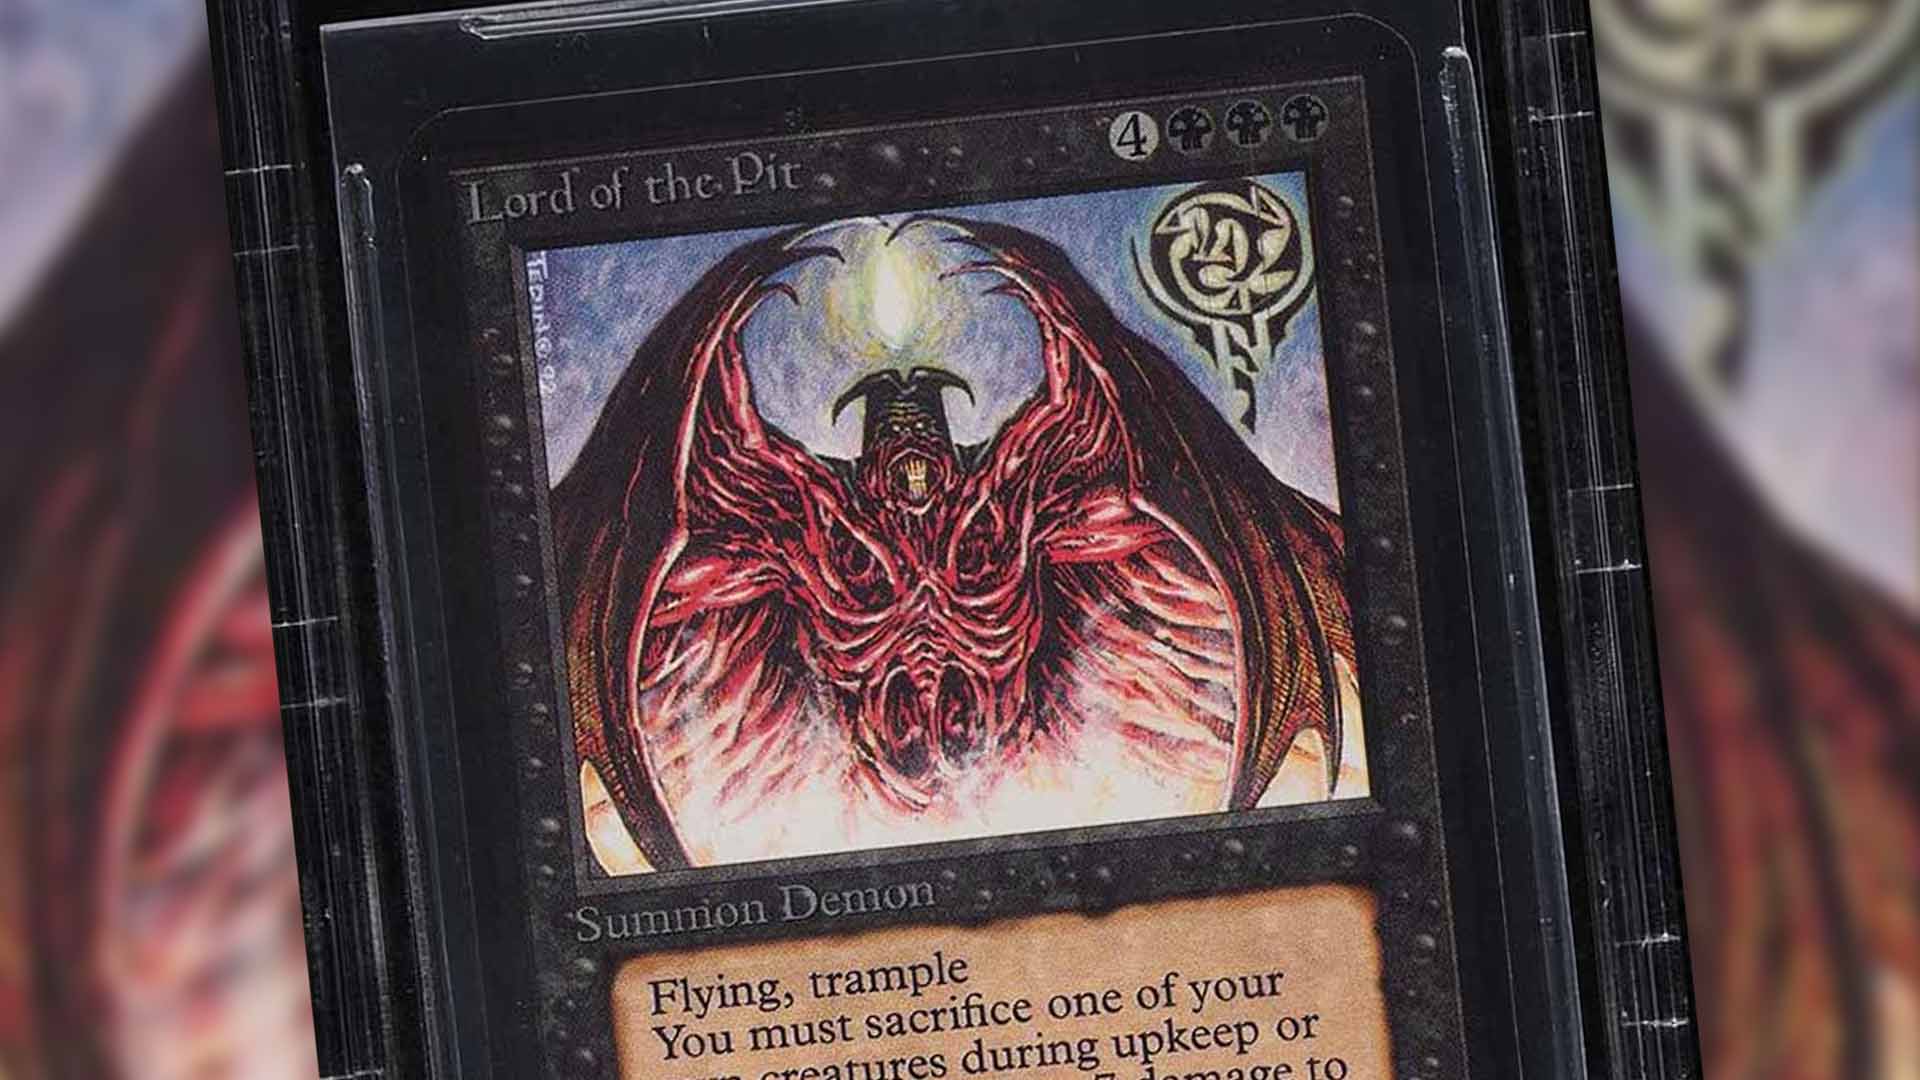 Image for Magic: The Gathering card sells for six figures, becomes second-most valuable card after Black Lotus